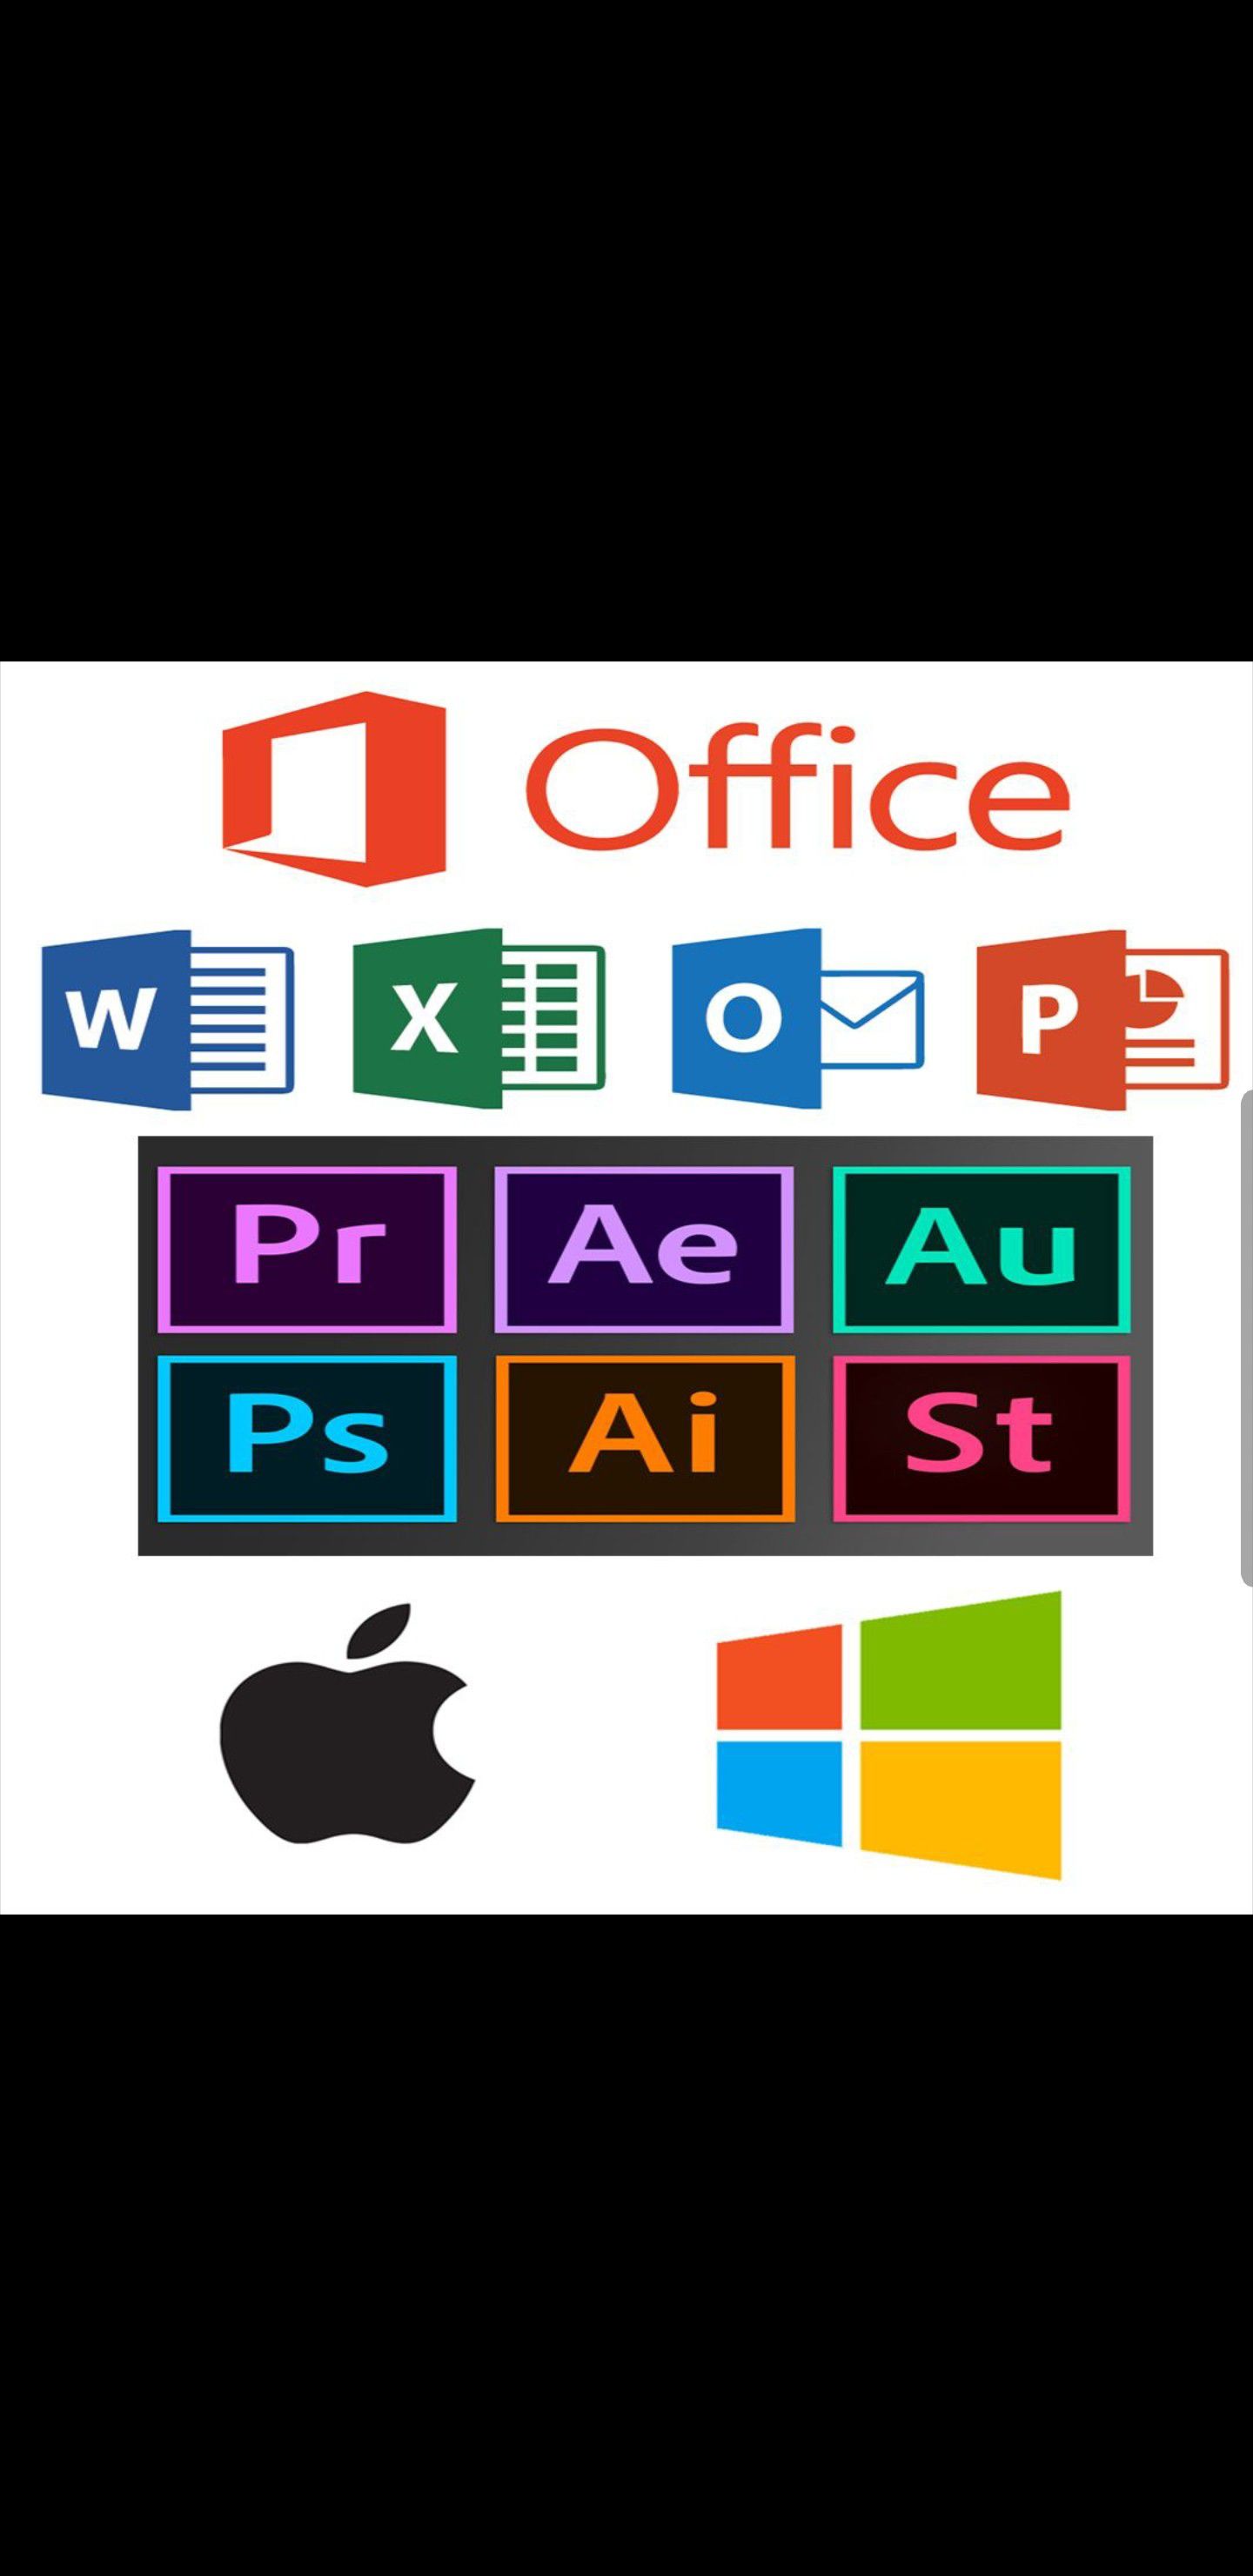 Need Microsoft office, QuickBooks or  Adobe programs or your computer cleaned?